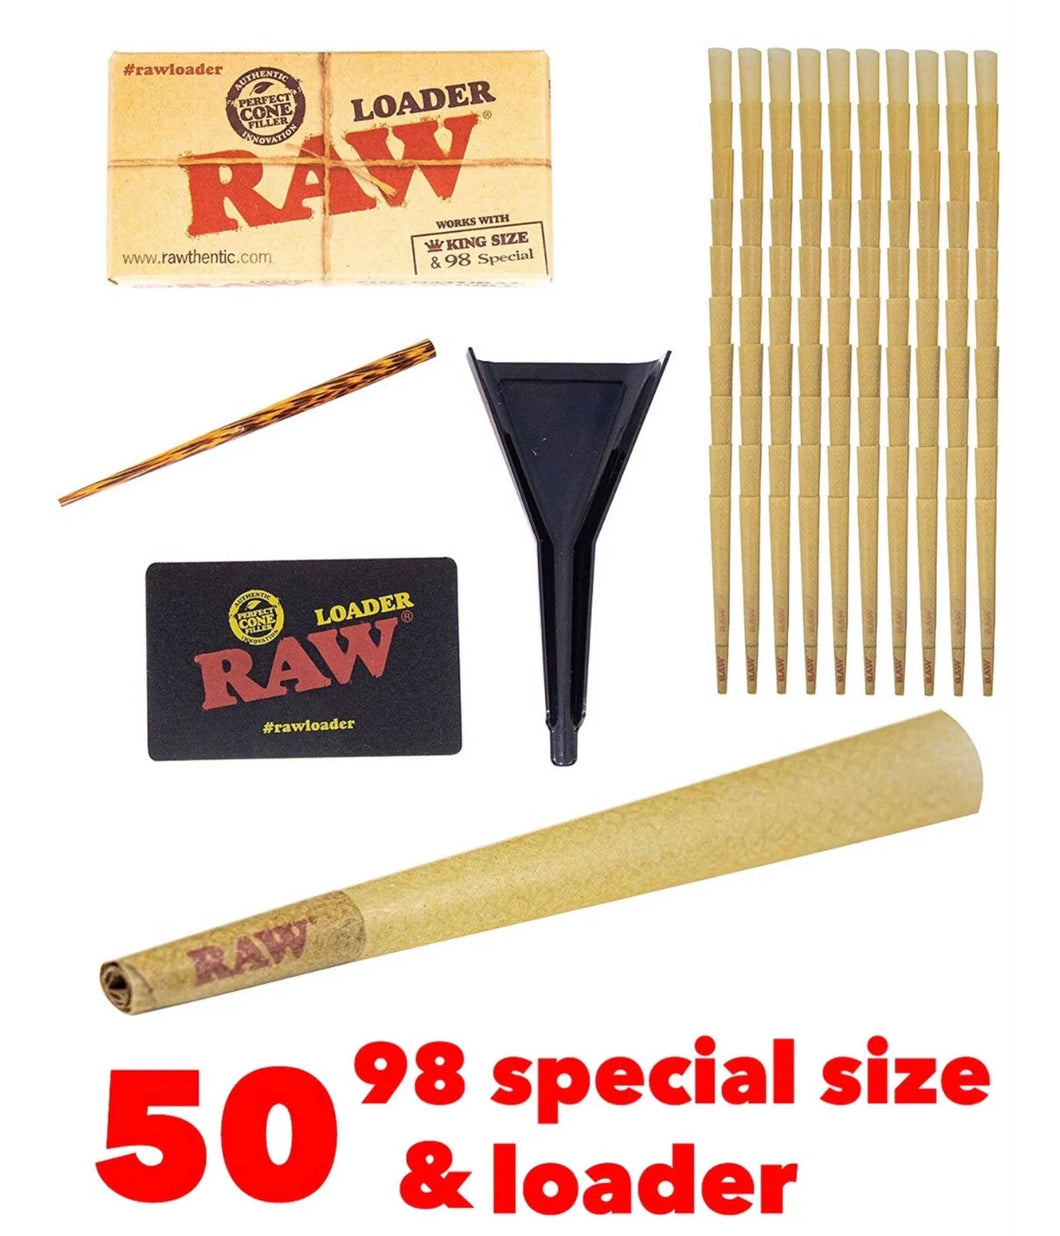 RAW Classic 98 special size Cones with Filter ( 50 packs)+ raw cone loader